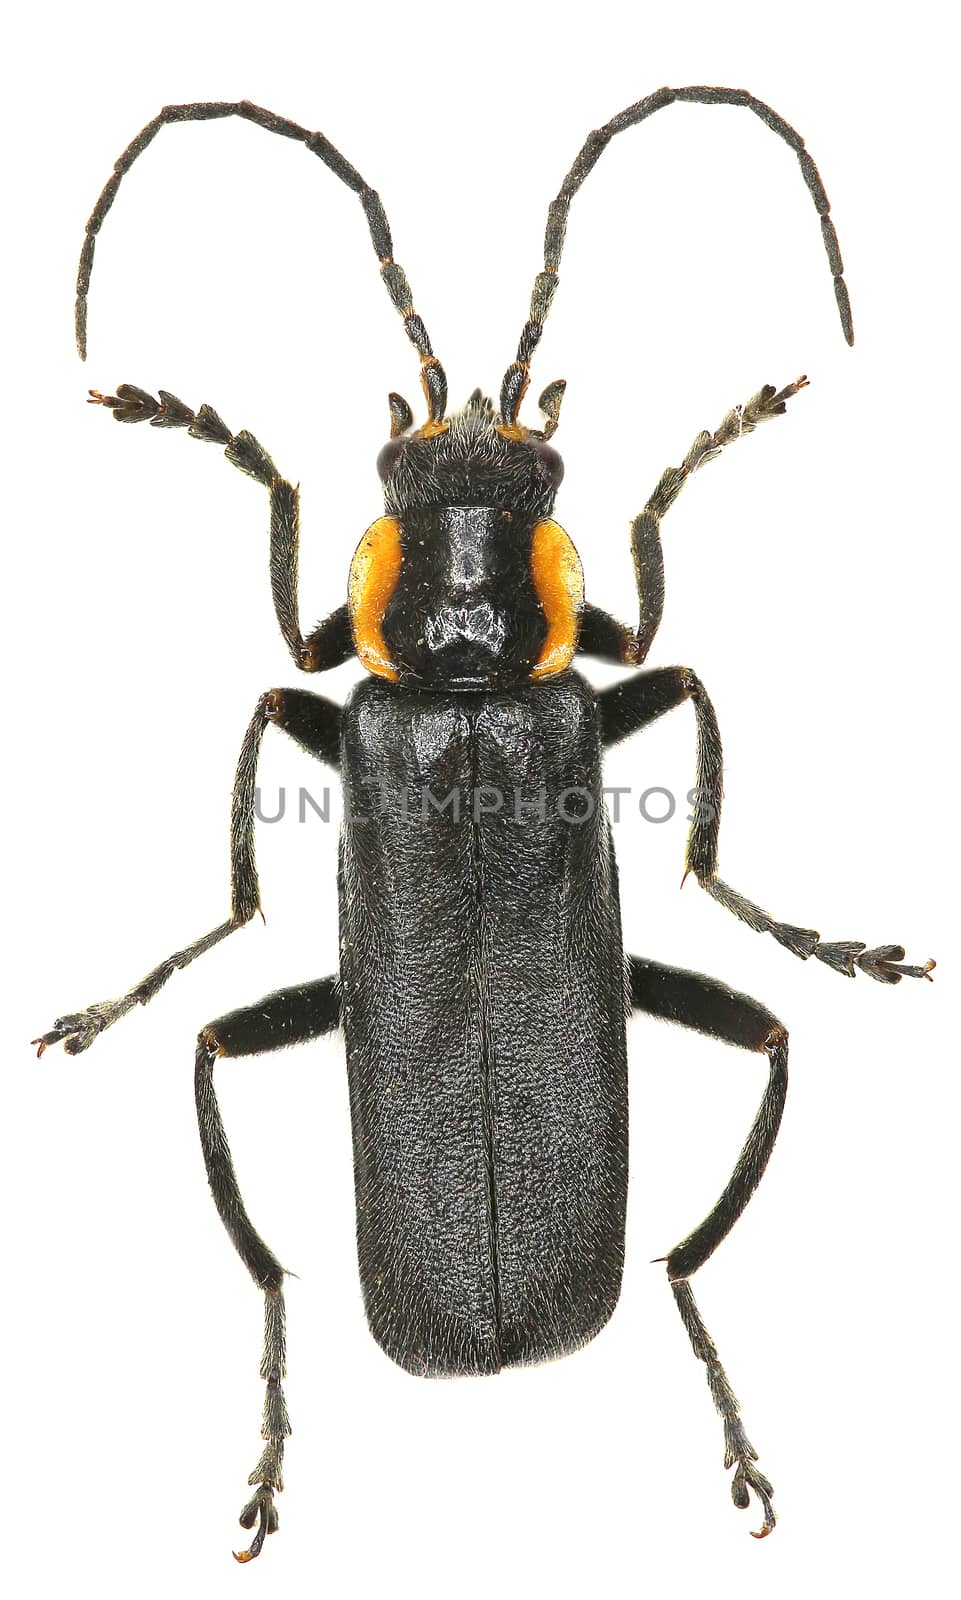 Black Soldier Beetle on white Background  -  Cantharis obscura (Linnaeus, 1758) by gstalker